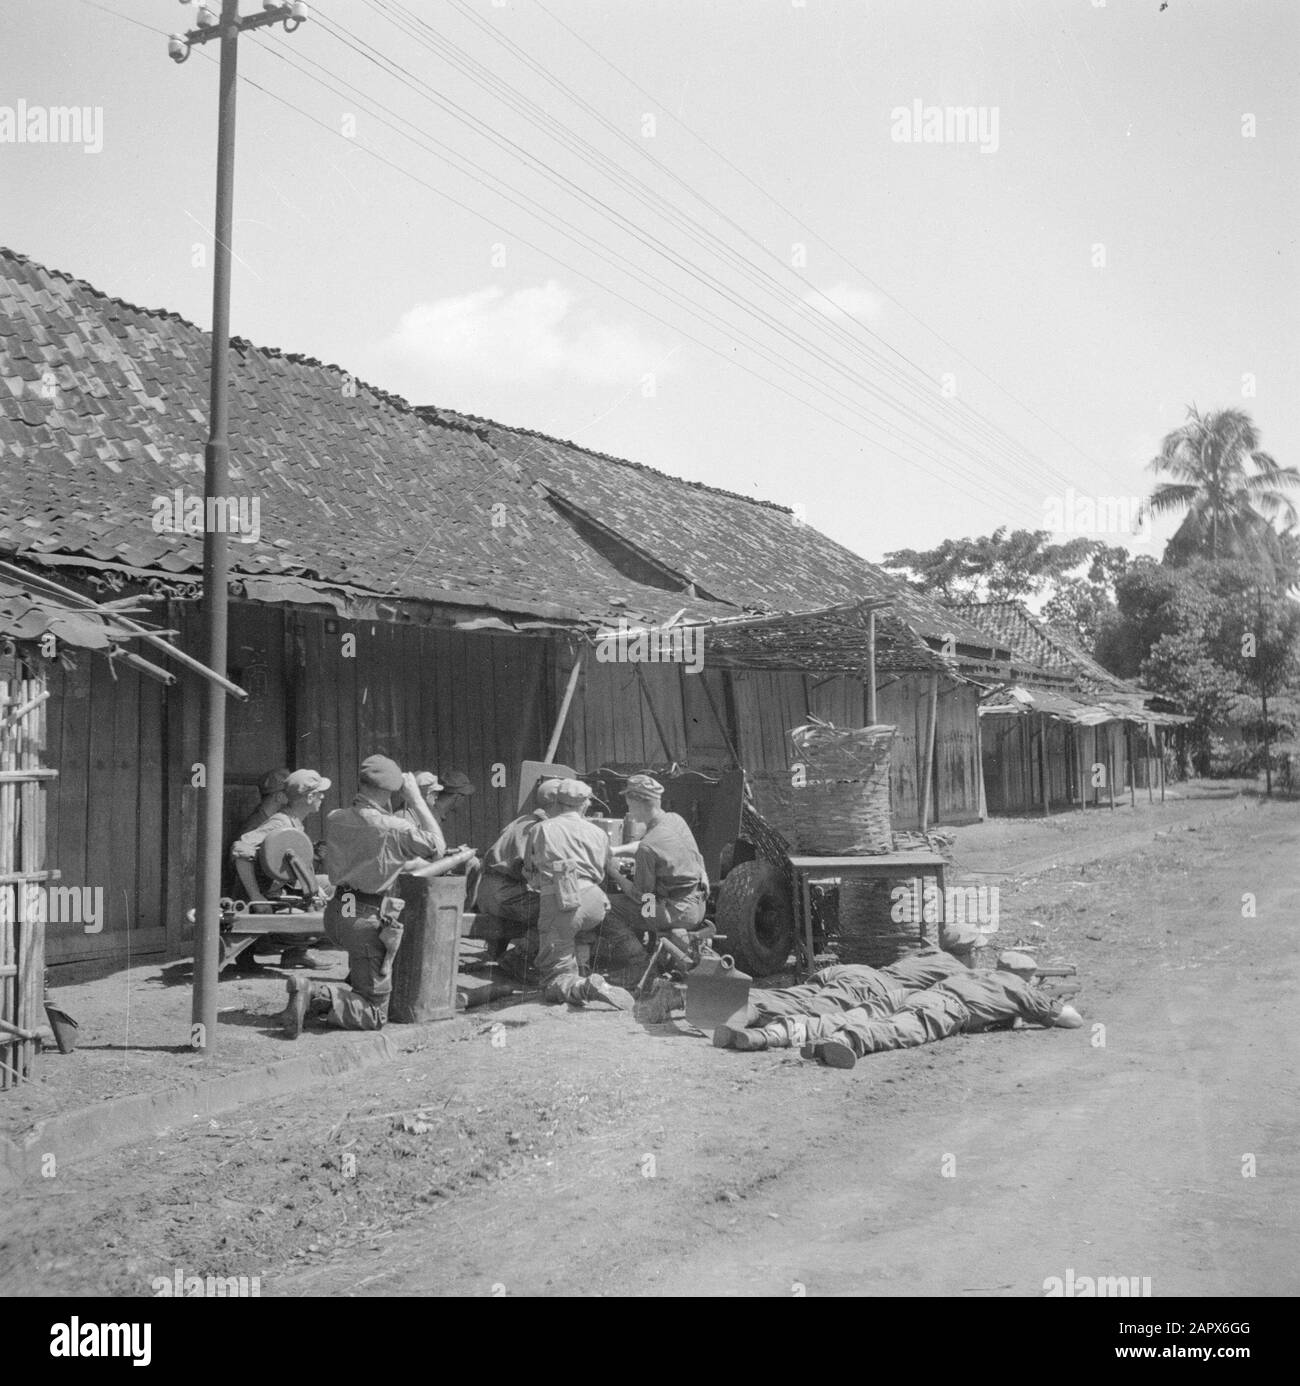 War volunteers in Malacca and Indonesia  Repair of light guns in a kampong Date: March 1946 Location: Indonesia, Indonesia, Java, Dutch East Indies Keywords: artillery, villages, military Stock Photo